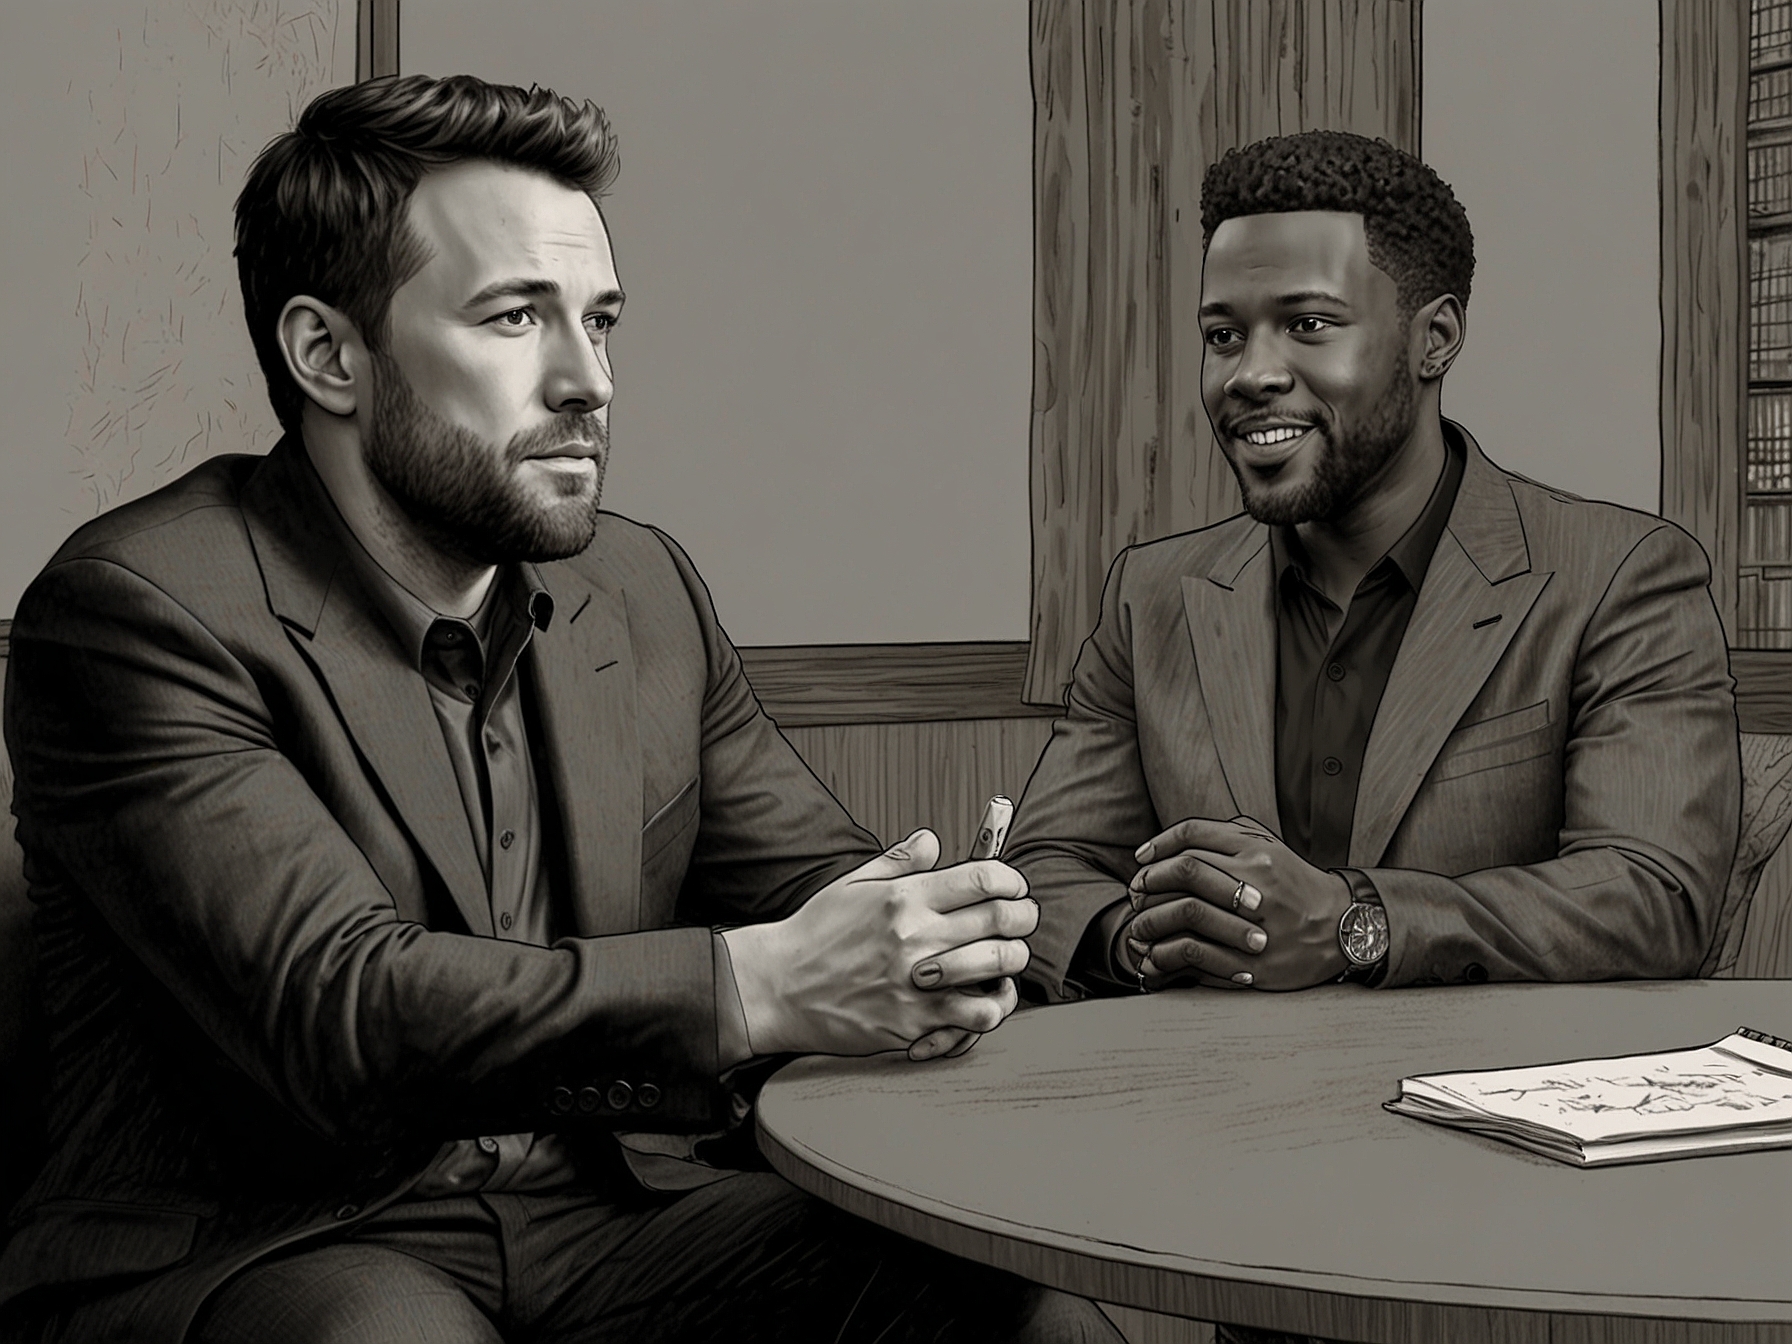 Ben Affleck during an interview with Kevin Hart, opening up about the challenges of his marriage to Jennifer Lawrence while addressing persistent divorce rumors.